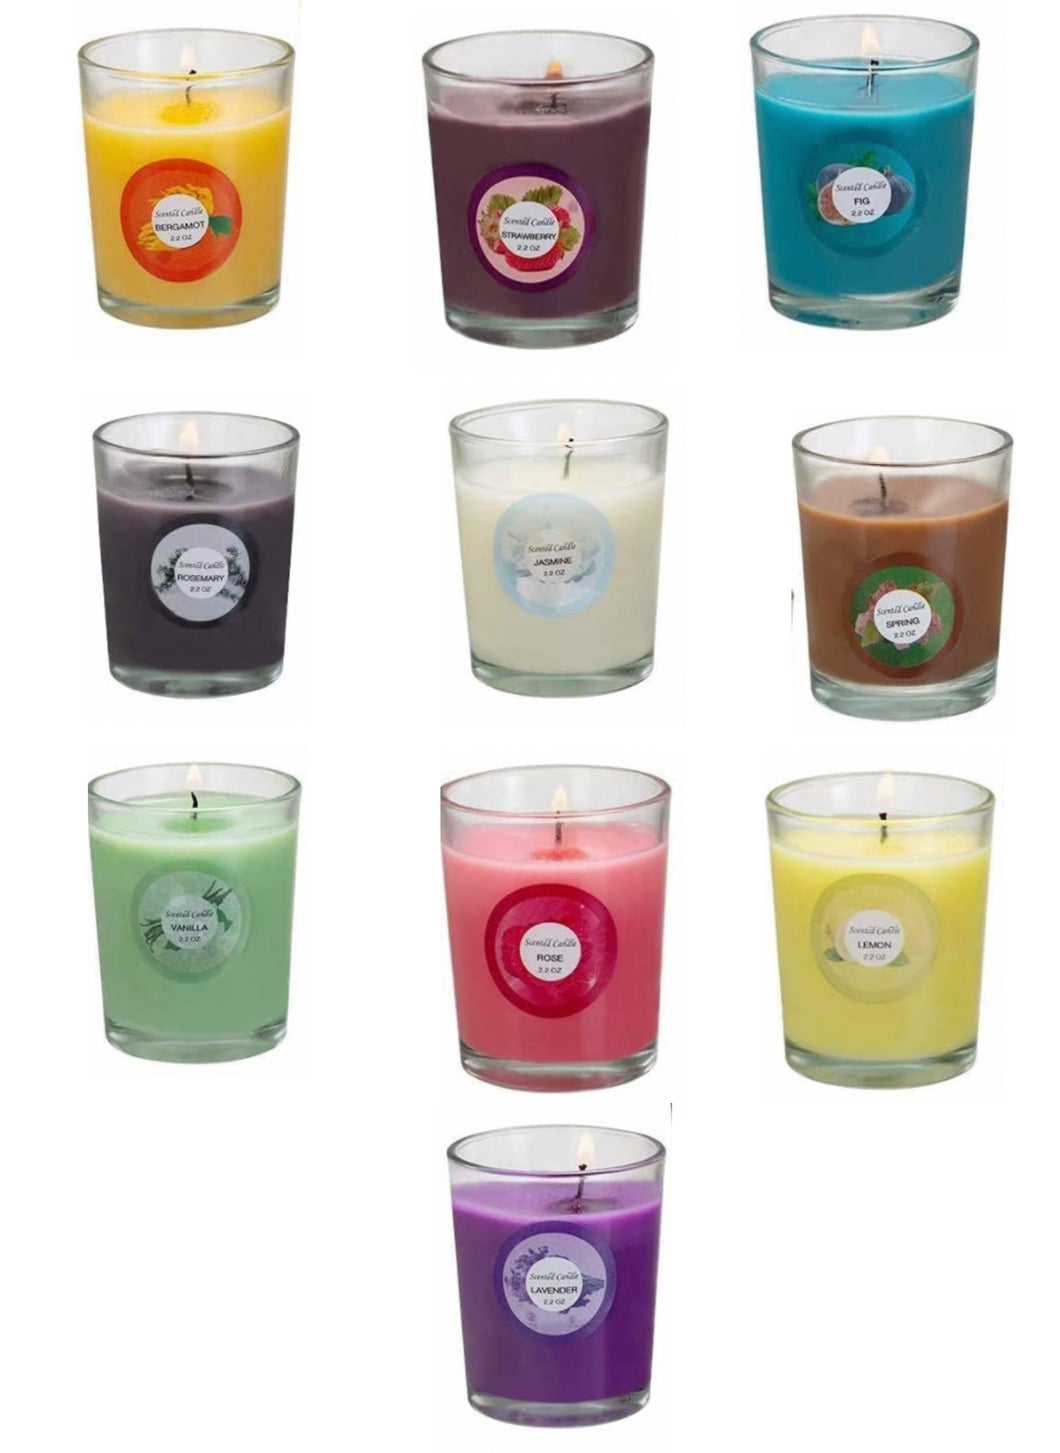 Soy scented candles